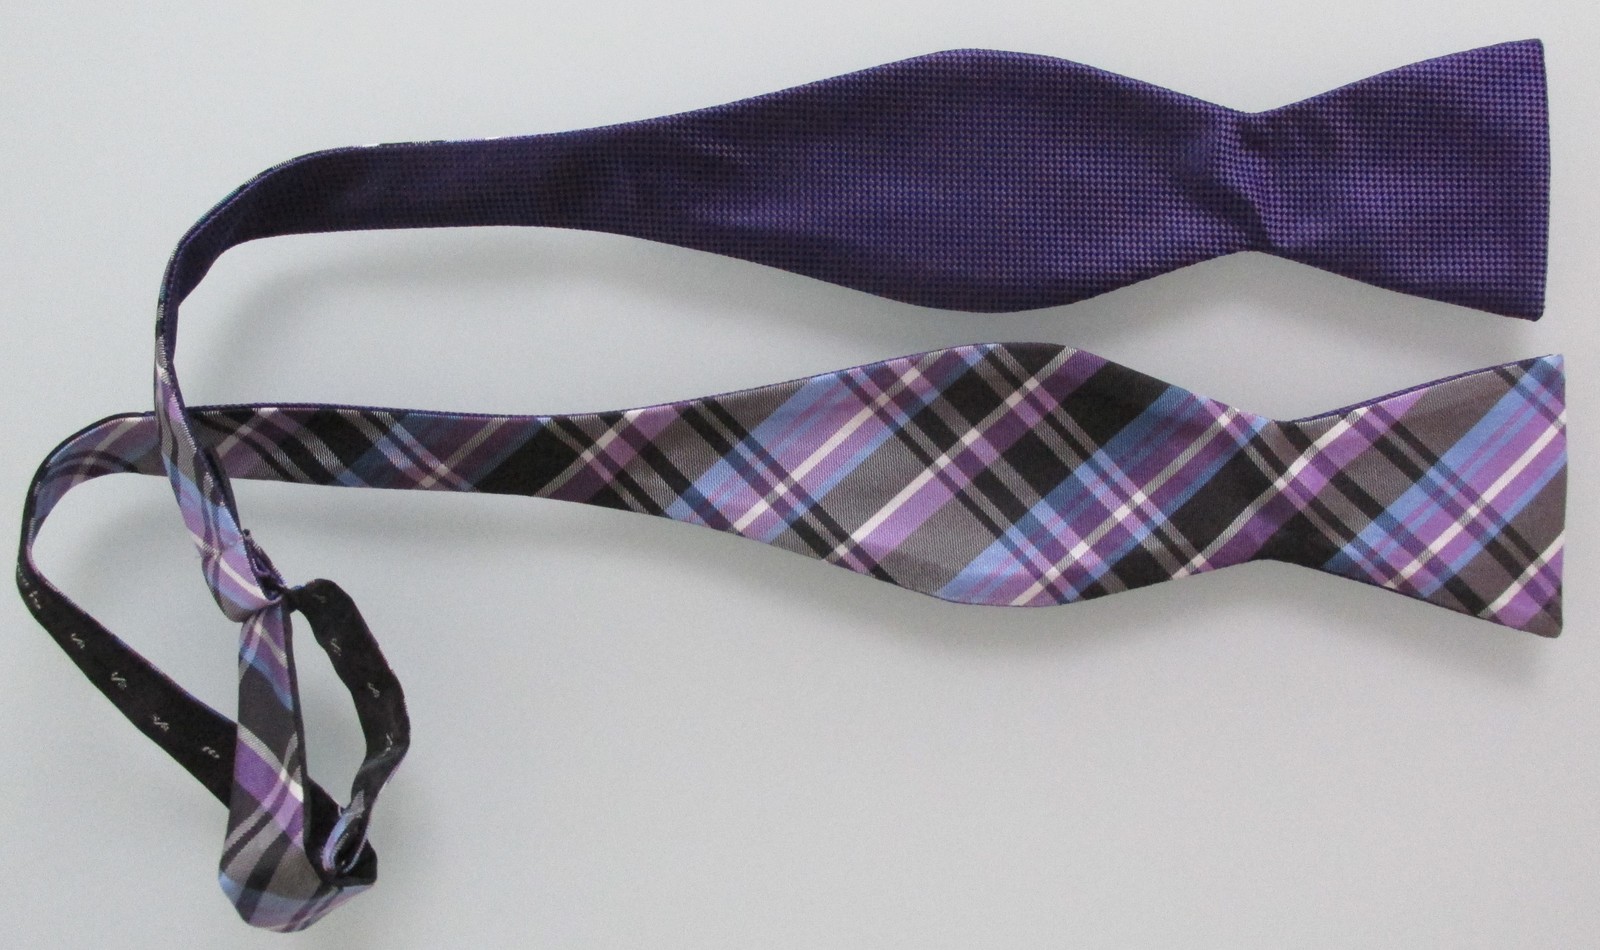 Primary image for Unbranded Reversible Self-Tie Bow Tie